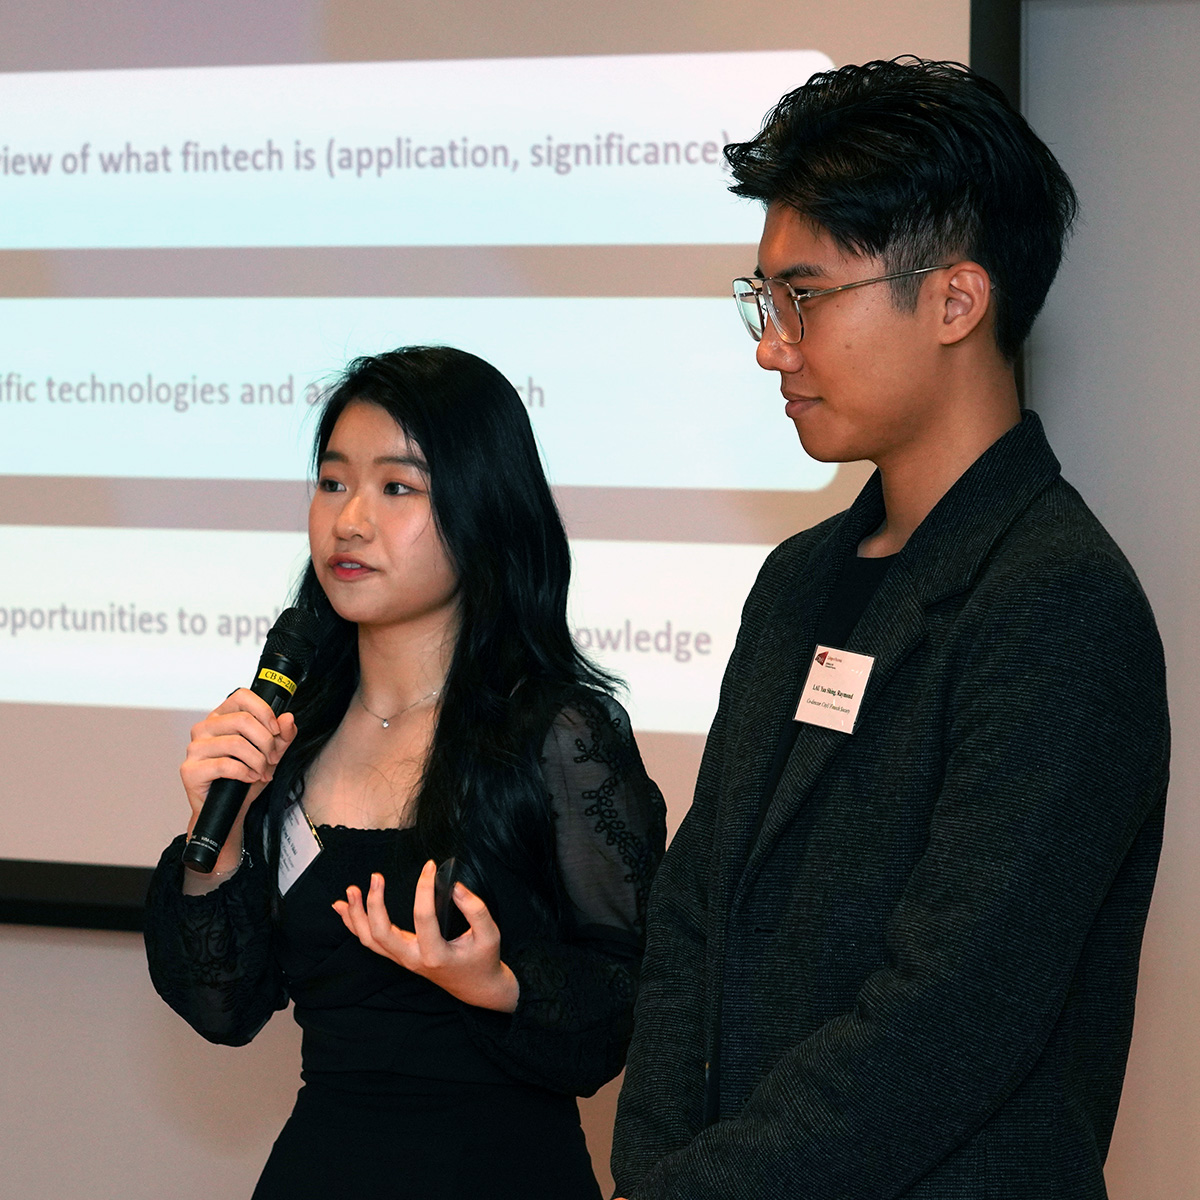 Co-directors of CityU Fintech Society, Lai Wing-ki (BBA Global Business) (left) and Raymond Lau Yau-shing (BBA GBSM) presents their work at the reception